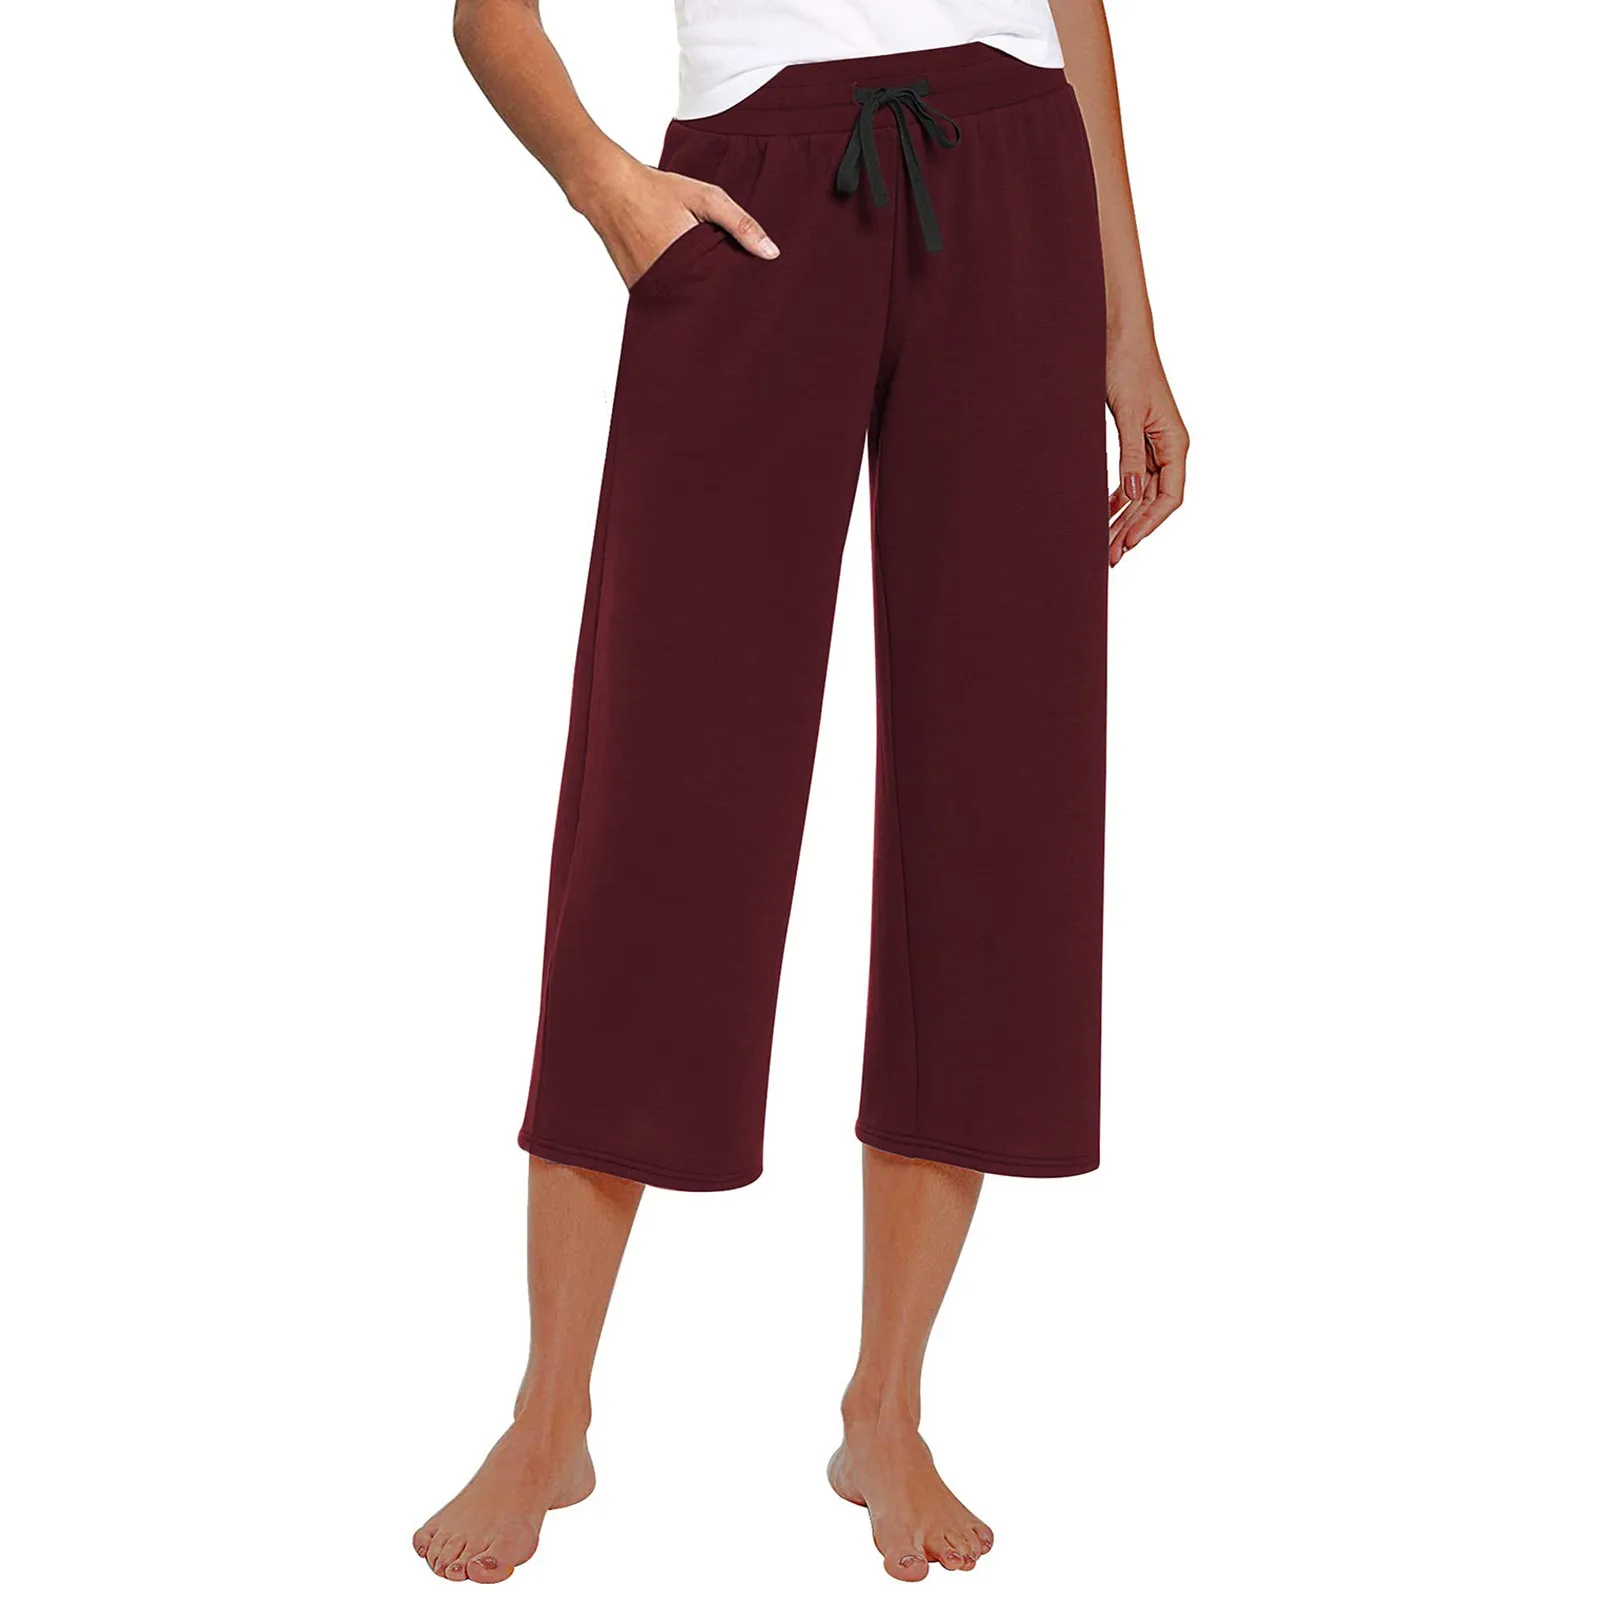 Thin High Waist Wide Leg Pants Spring Summer Baggy Office Pantalones Formal Straight Loose Straight Pants Women Casual Trousers